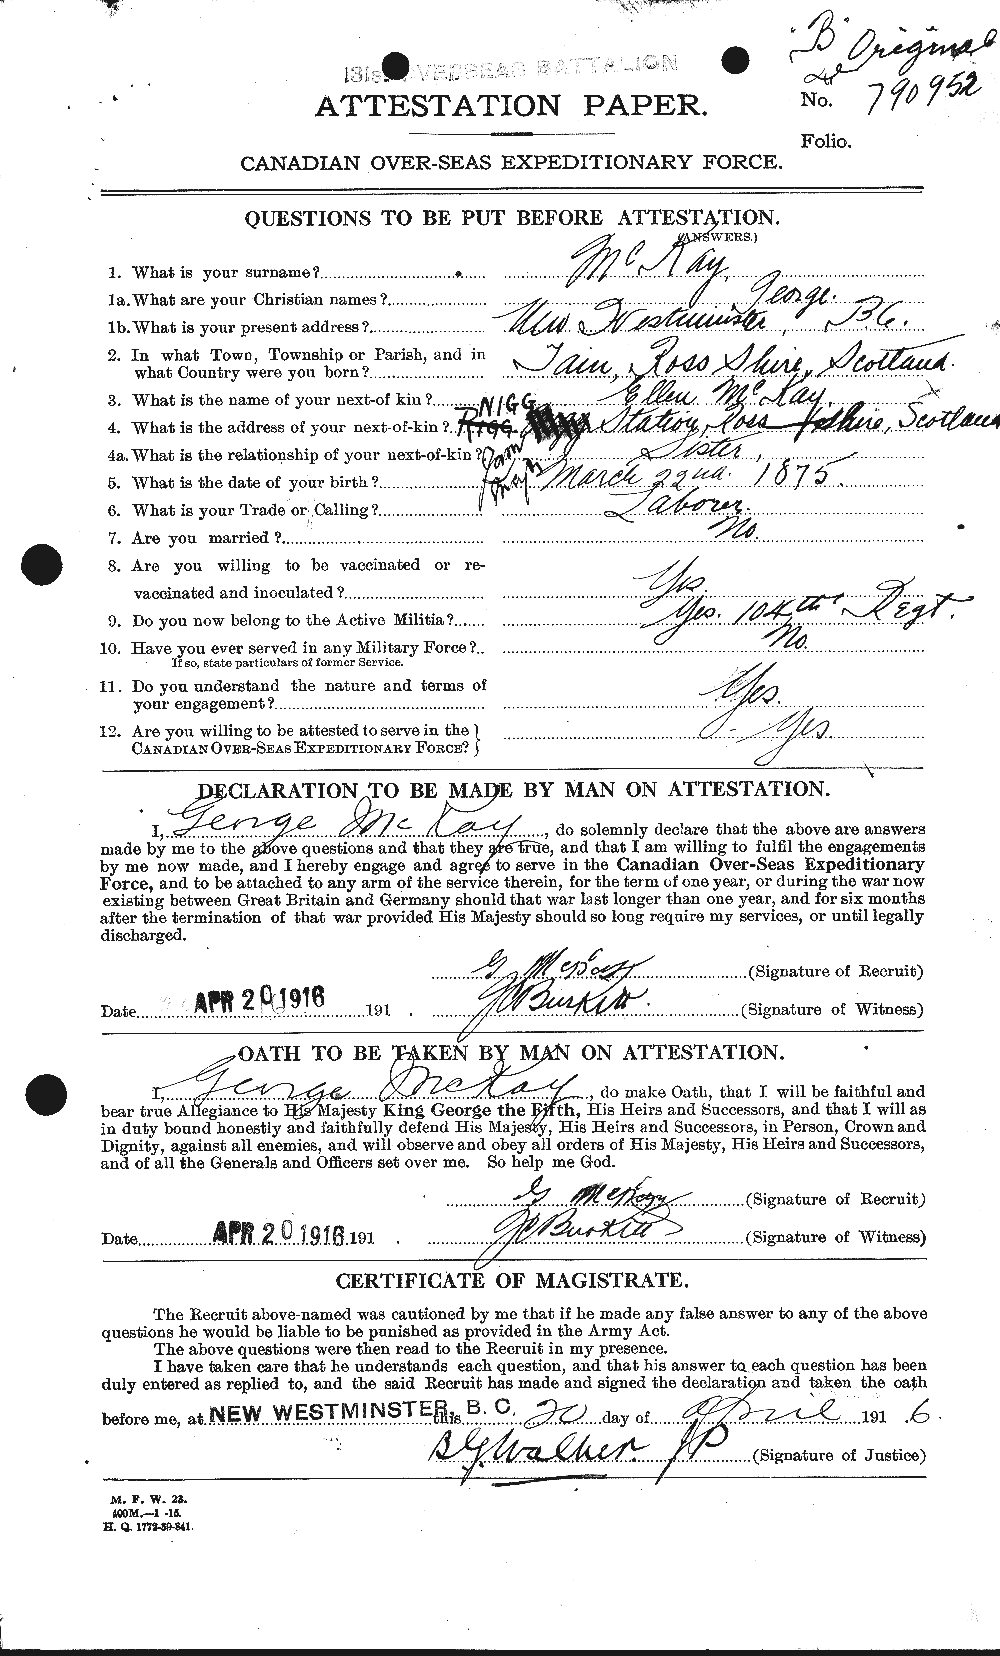 Personnel Records of the First World War - CEF 534625a